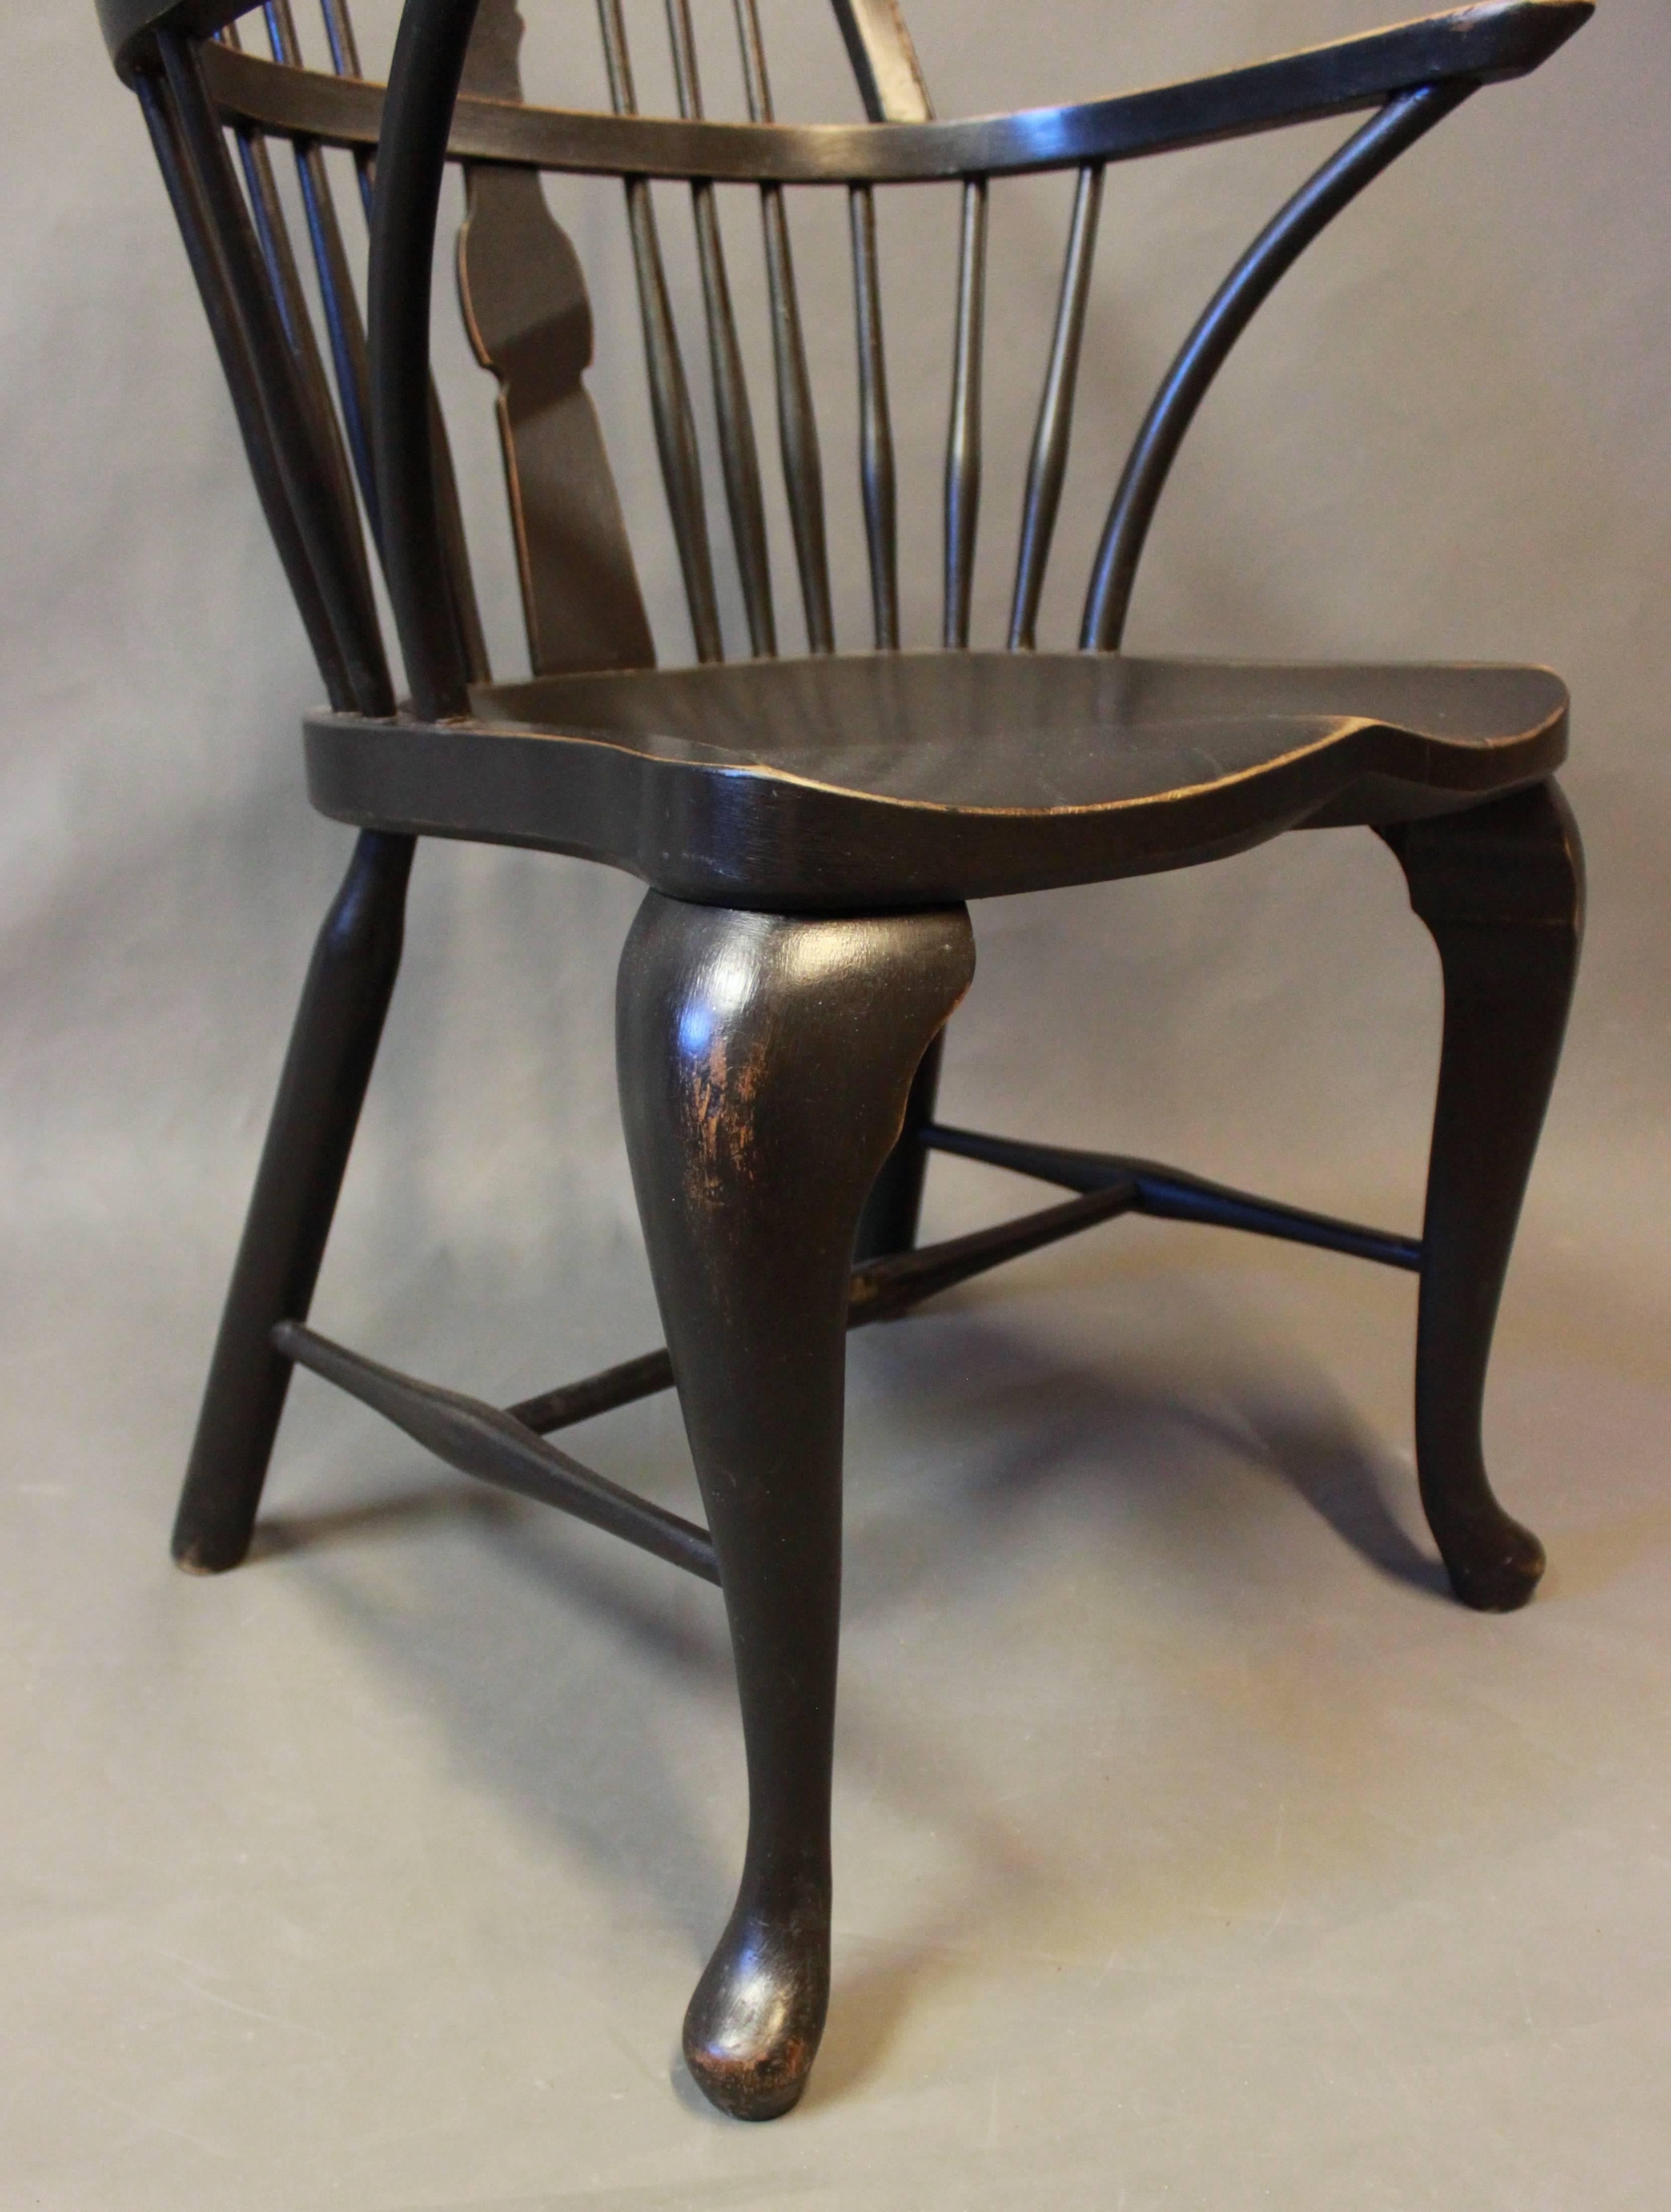 Black Painted Windsor Armchair in Wood from the 1880s For Sale at 1stDibs